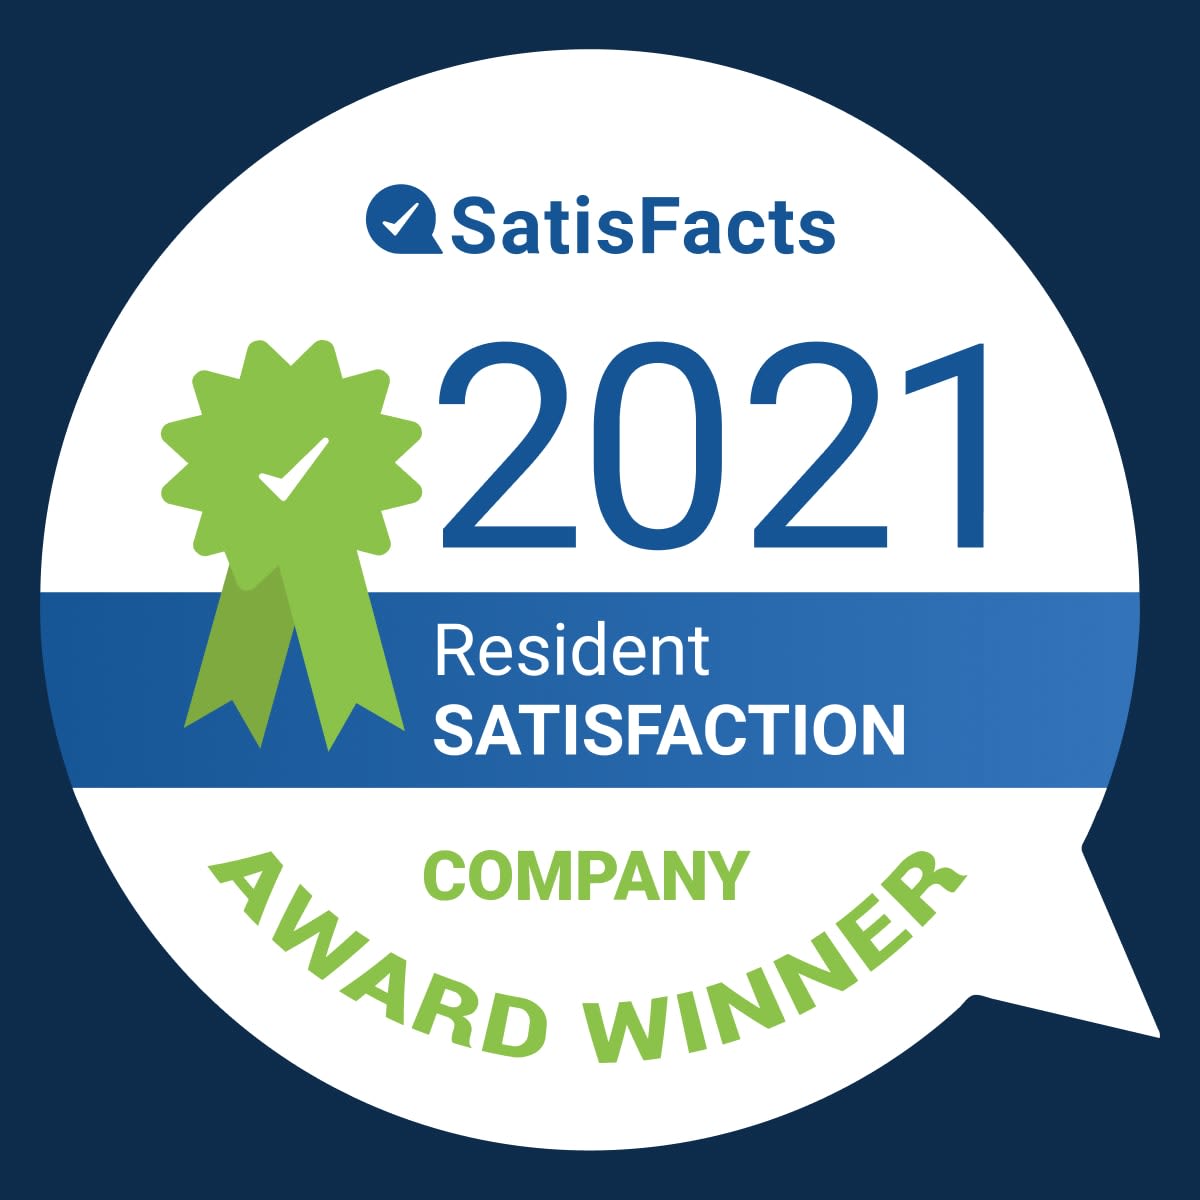 Satisfacts badge for Riverstone Apartments in Bryan, Texas